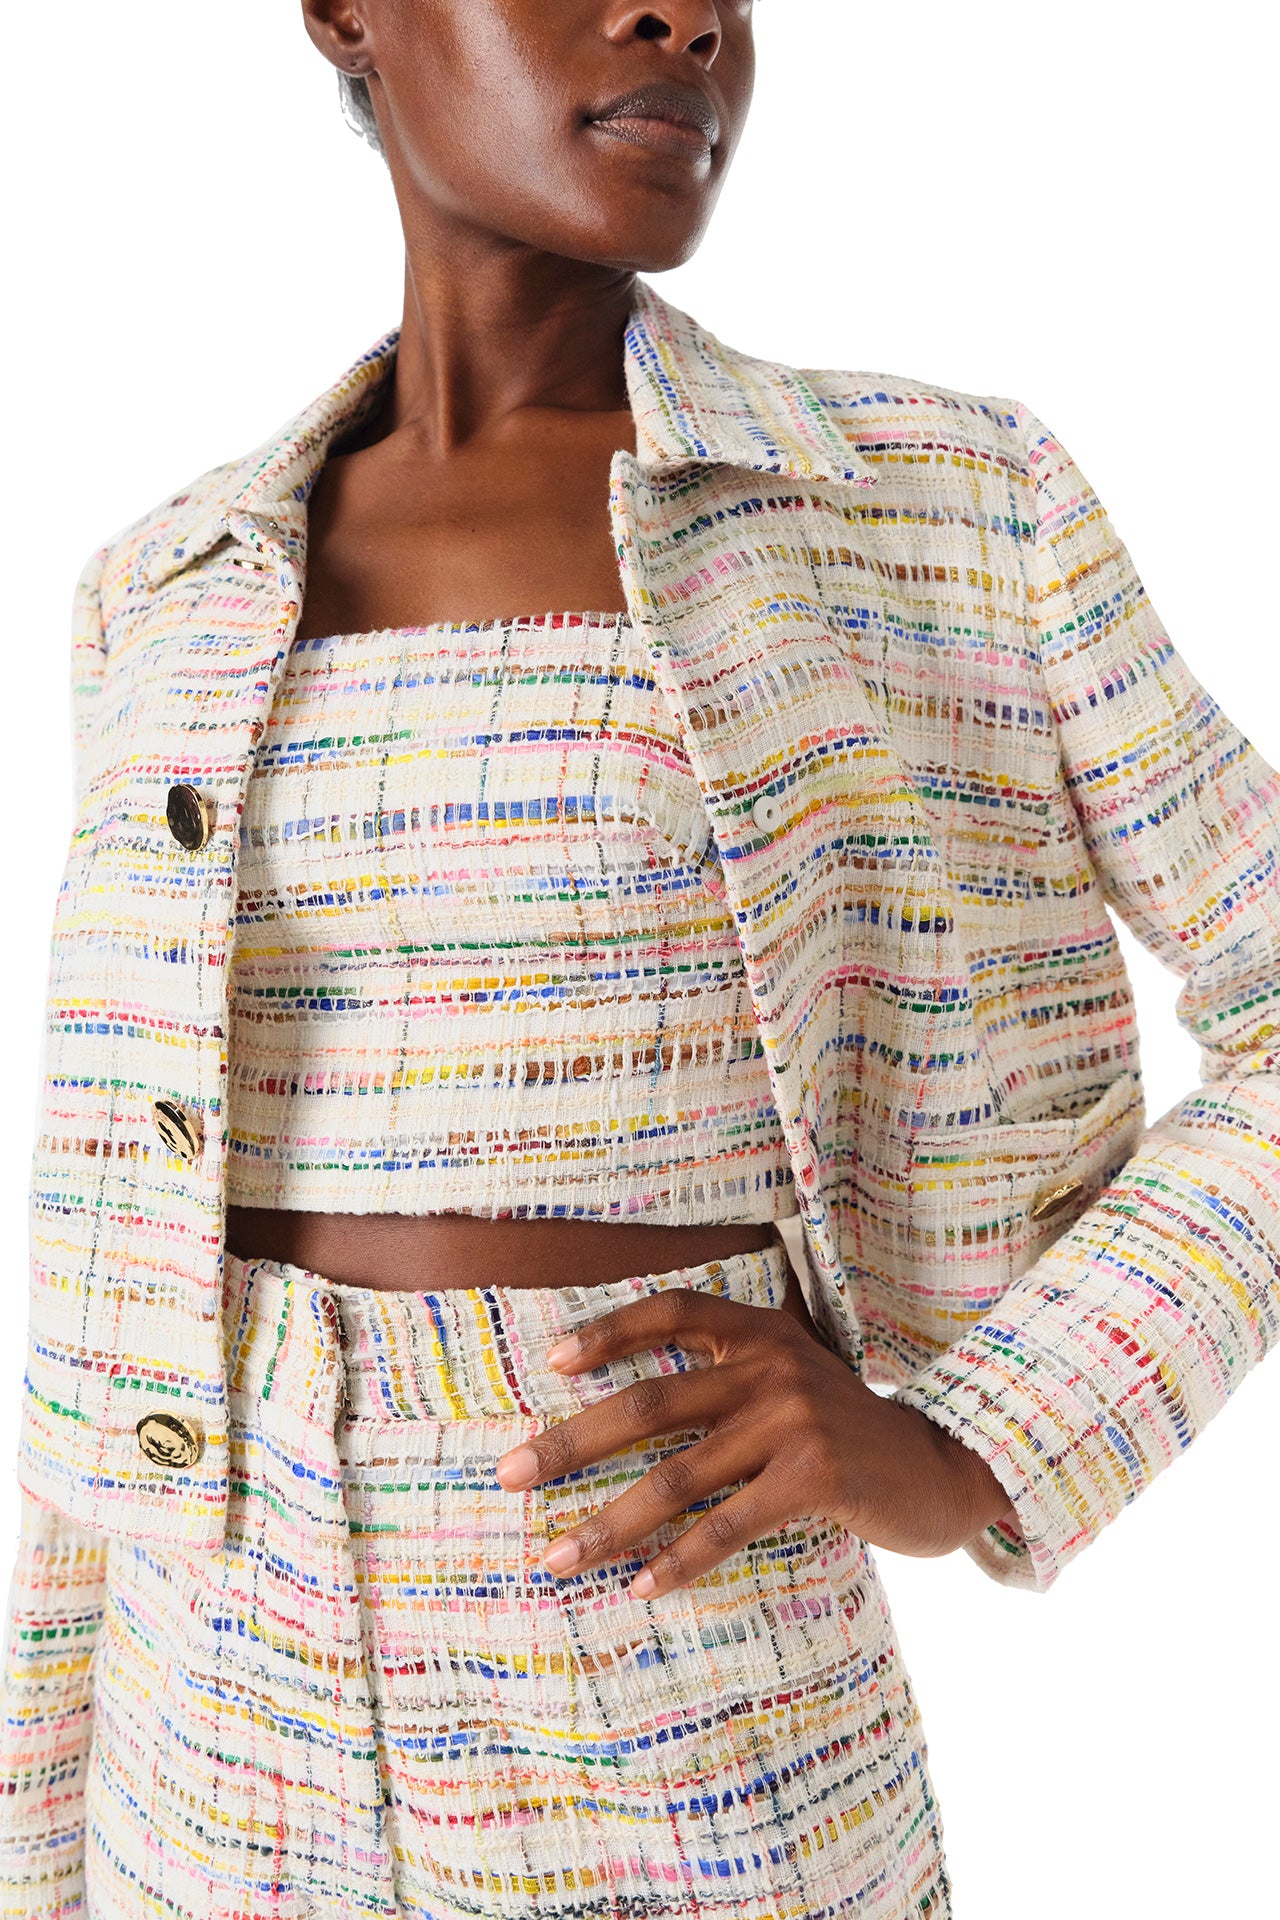 Monique Lhuillier Spring 2024 silk white multi colored tweed cropped jacket shown with high waisted trousers - fabric detail.